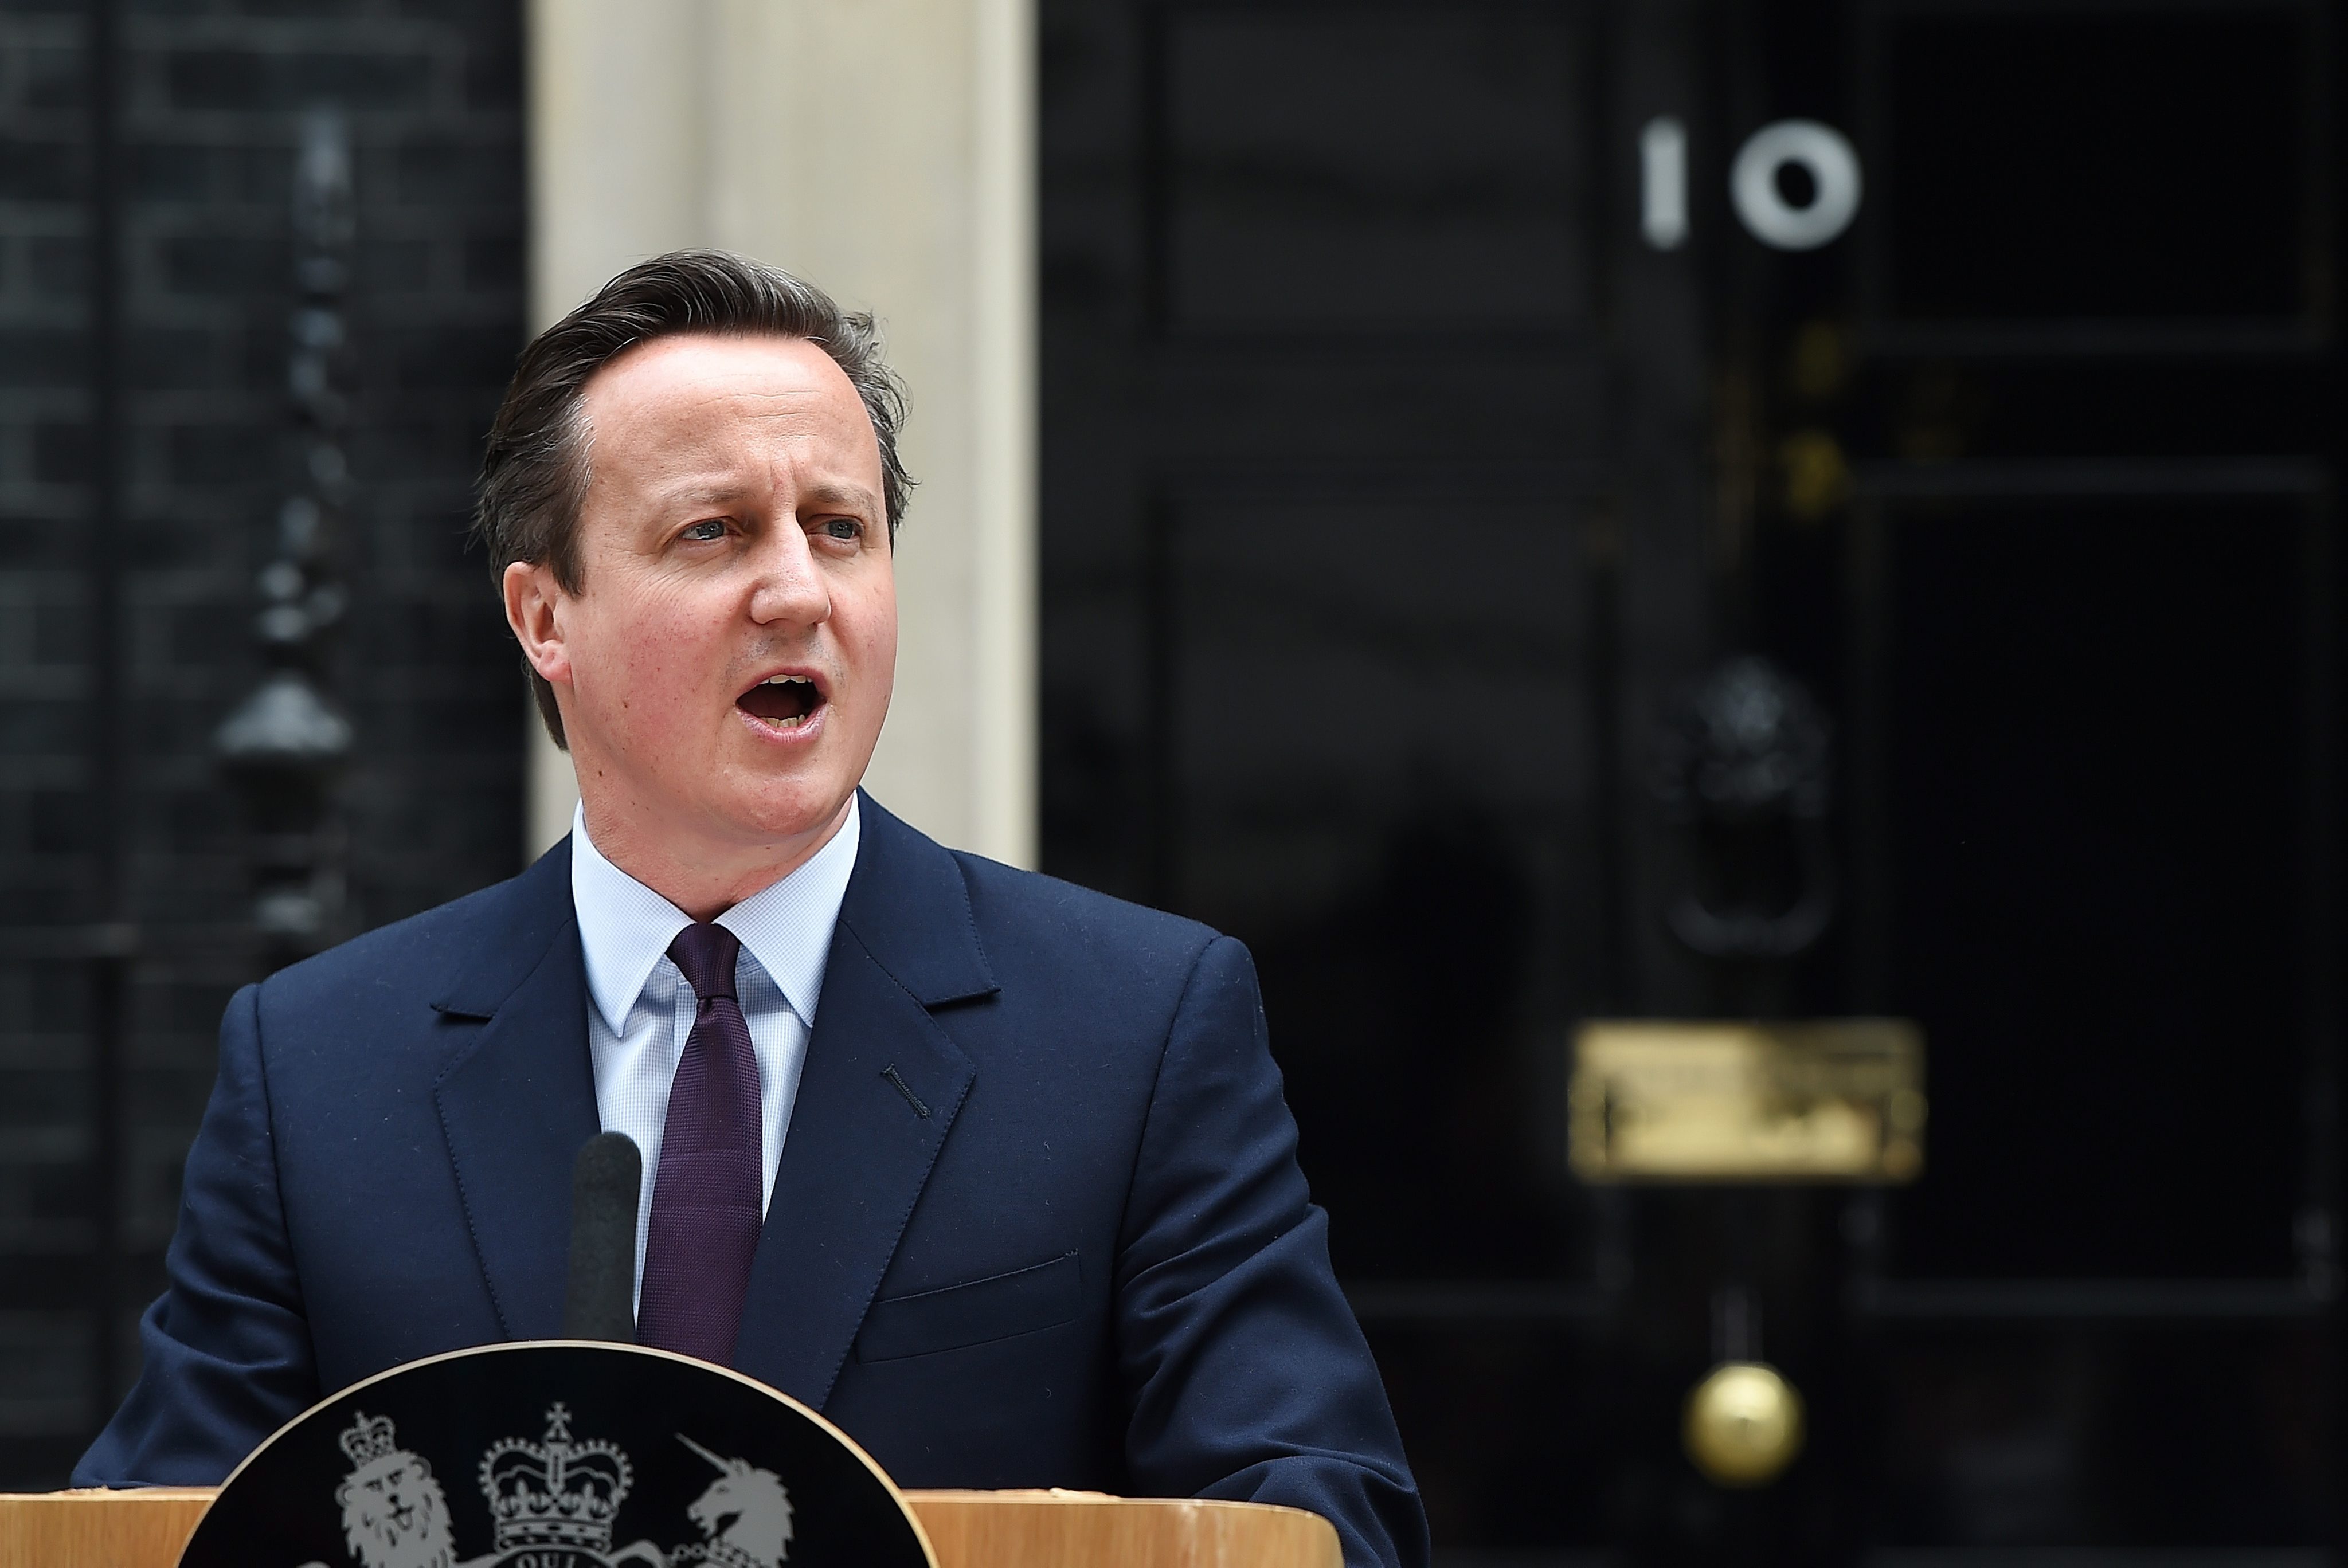 British Prime Minister and Conservative party leader David Cameron delivers a statement to the nation at Number 10 Downing Street in London. Photo: EPA